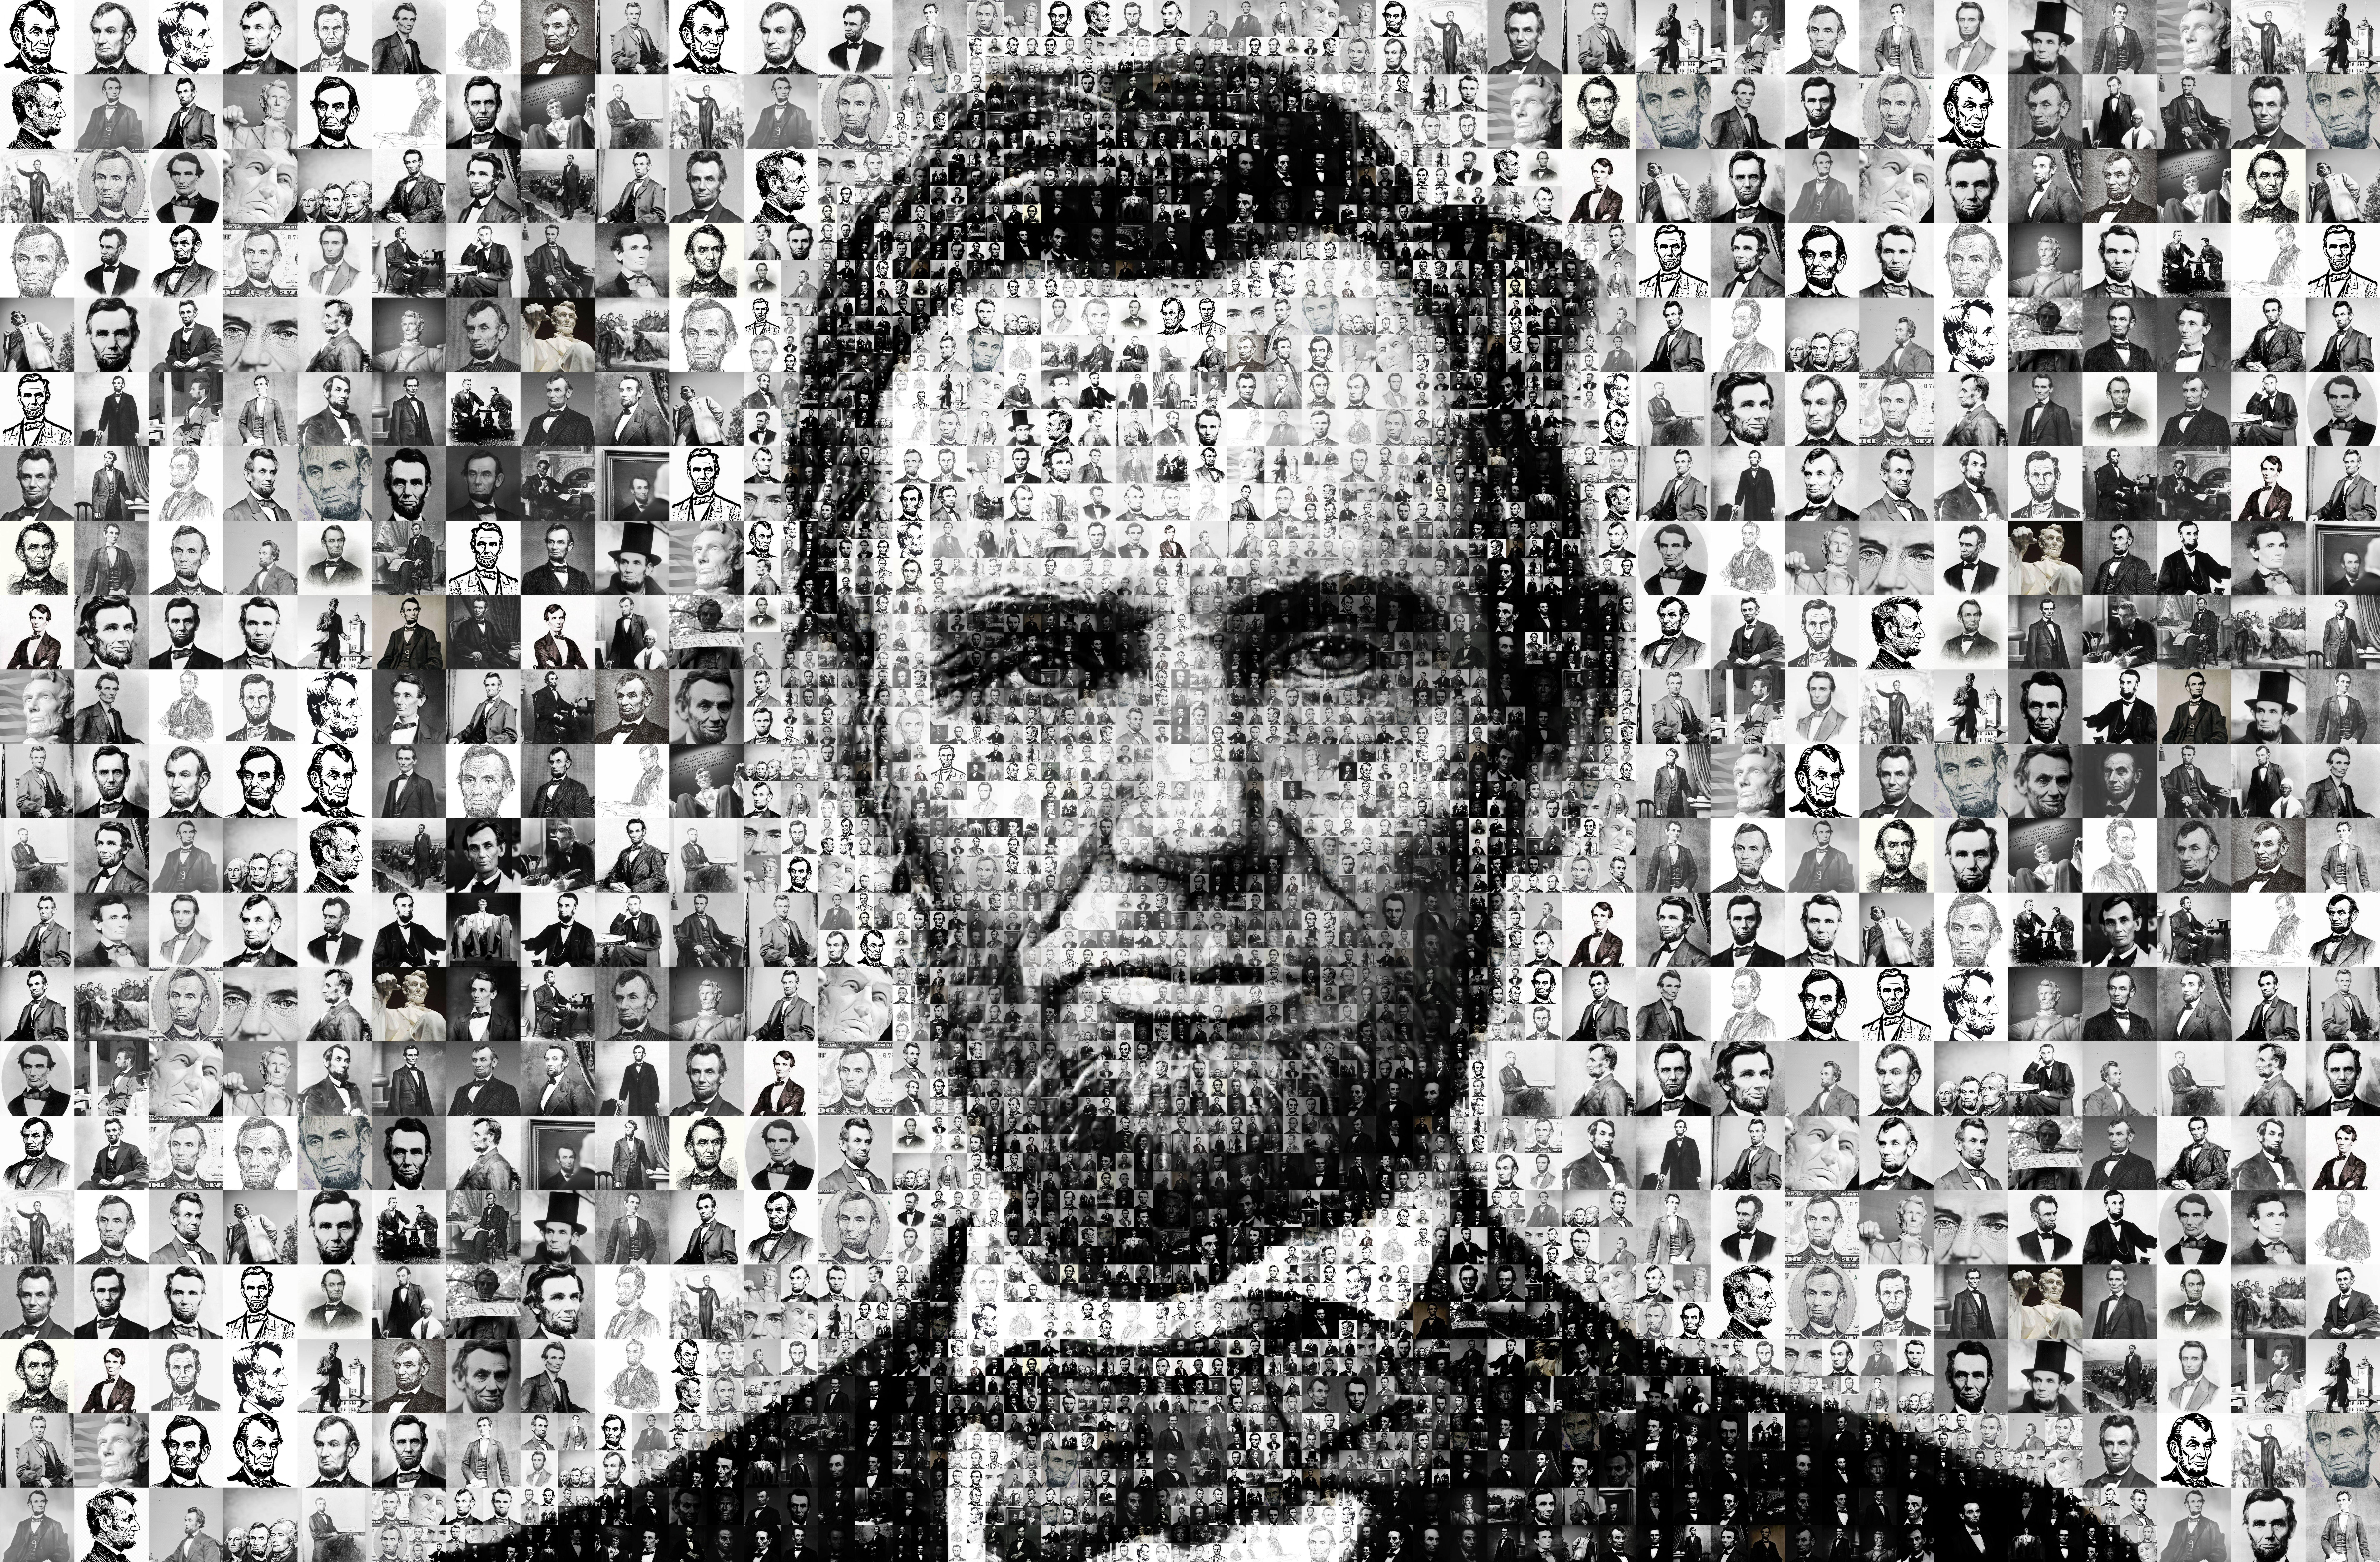 "The Godfather" President Abraham Lincoln